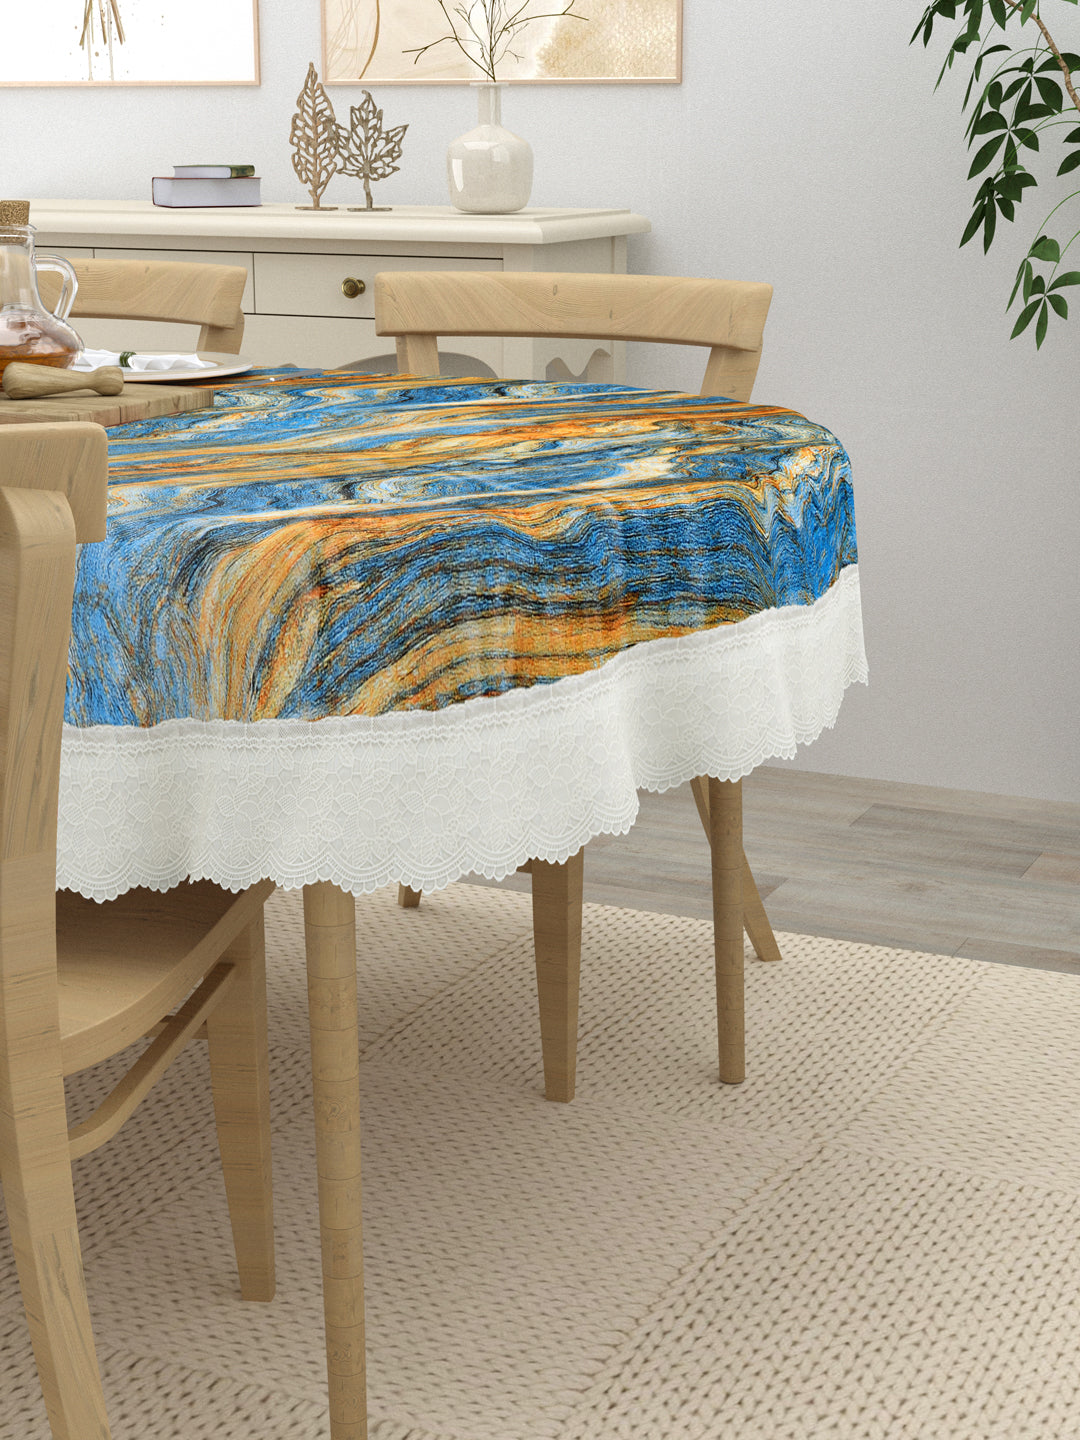 4 Seater Oval Dining Table Cover; 54x78 Inches; Material - PVC; Anti Slip; Blue & Golden Abstract